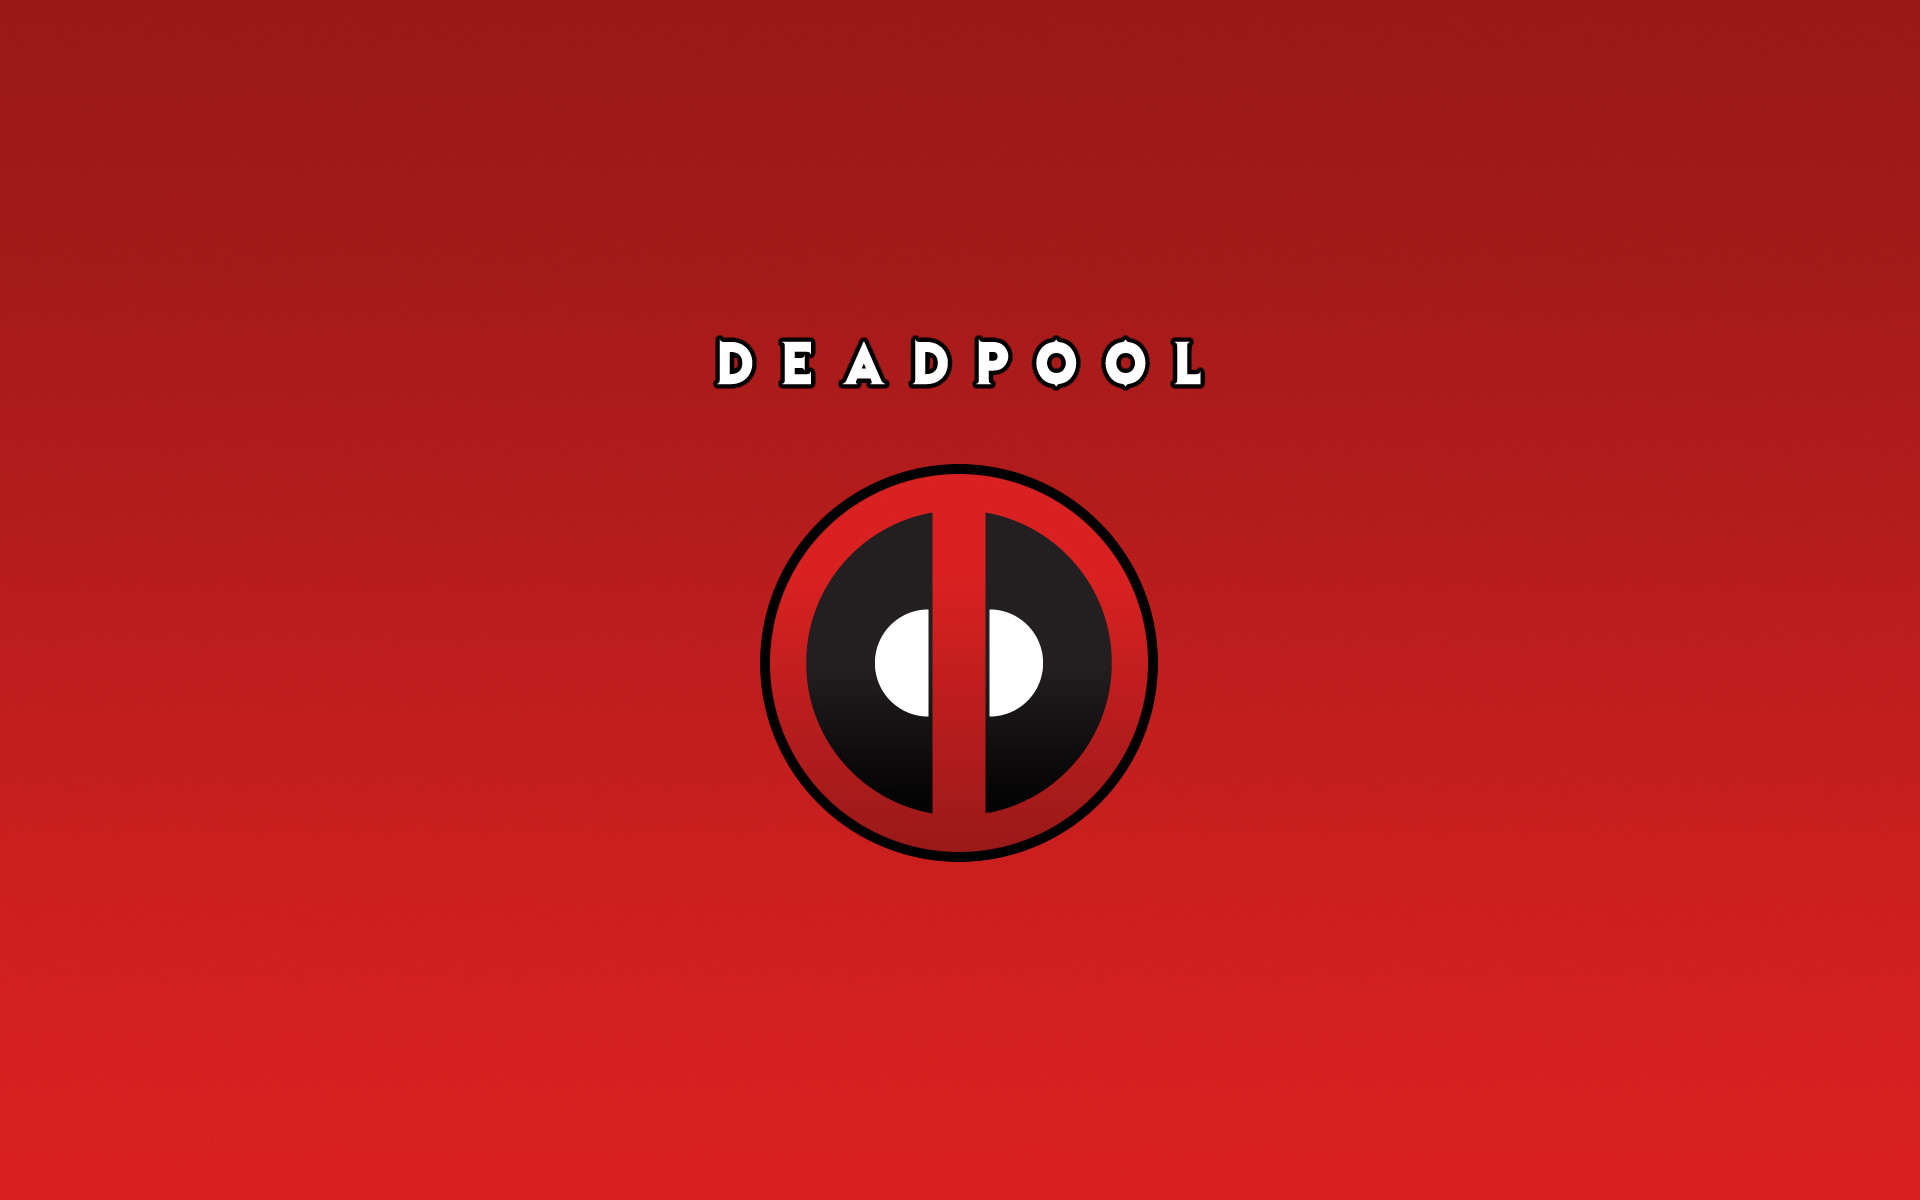 Deadpool wallpapers and stock photos